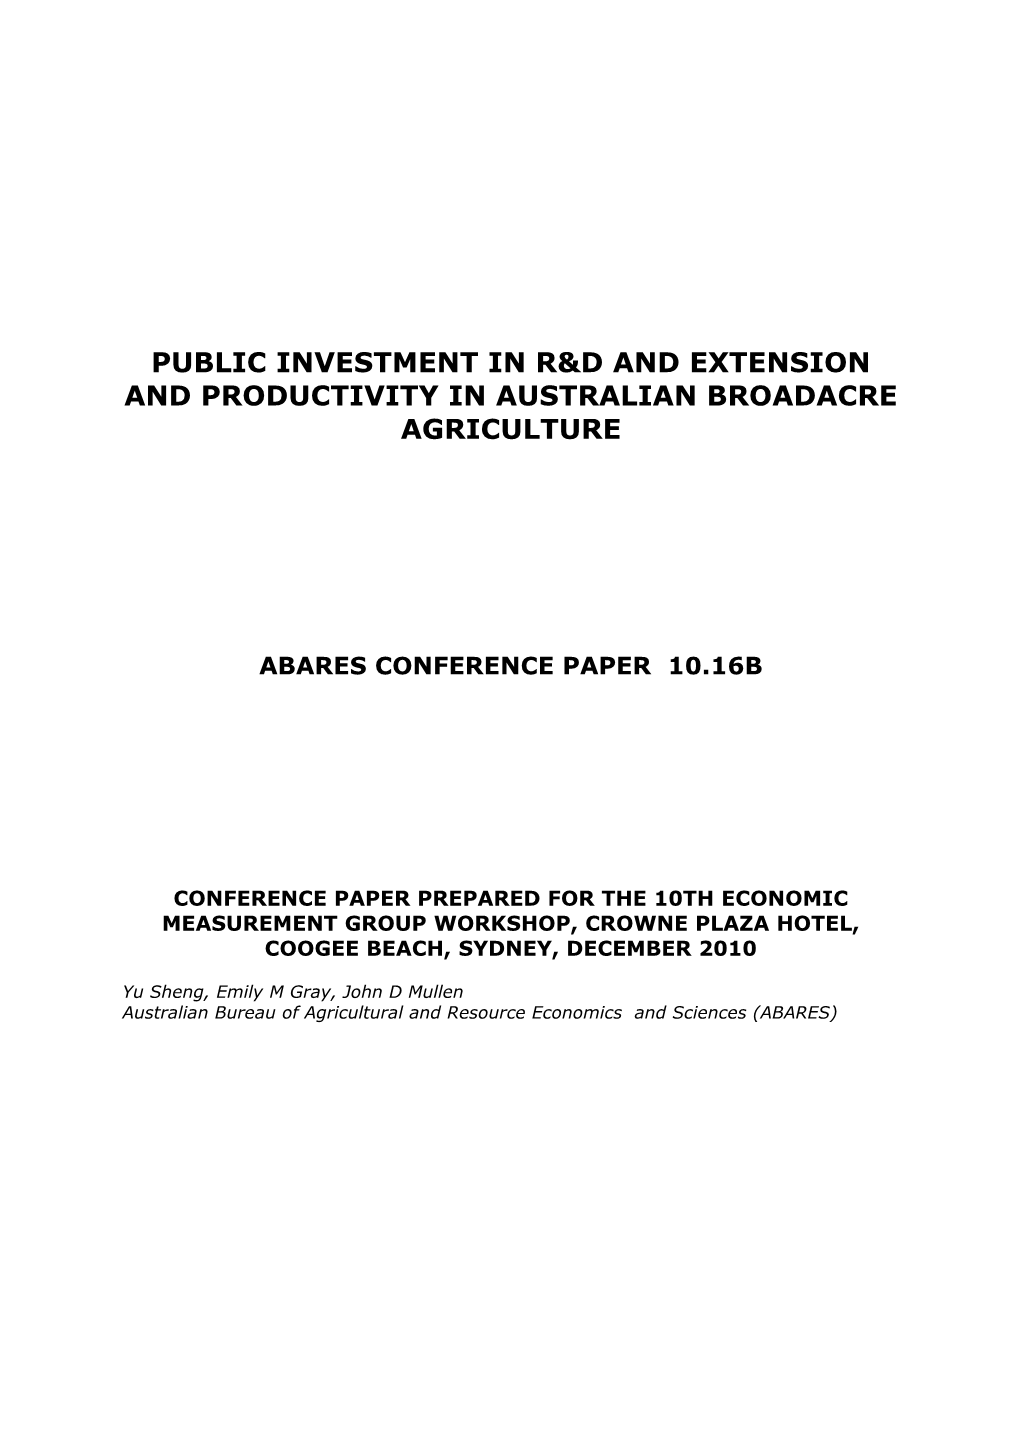 Public Investment in R&D and Extension and Productivity in Australian Broadacre Agriculture